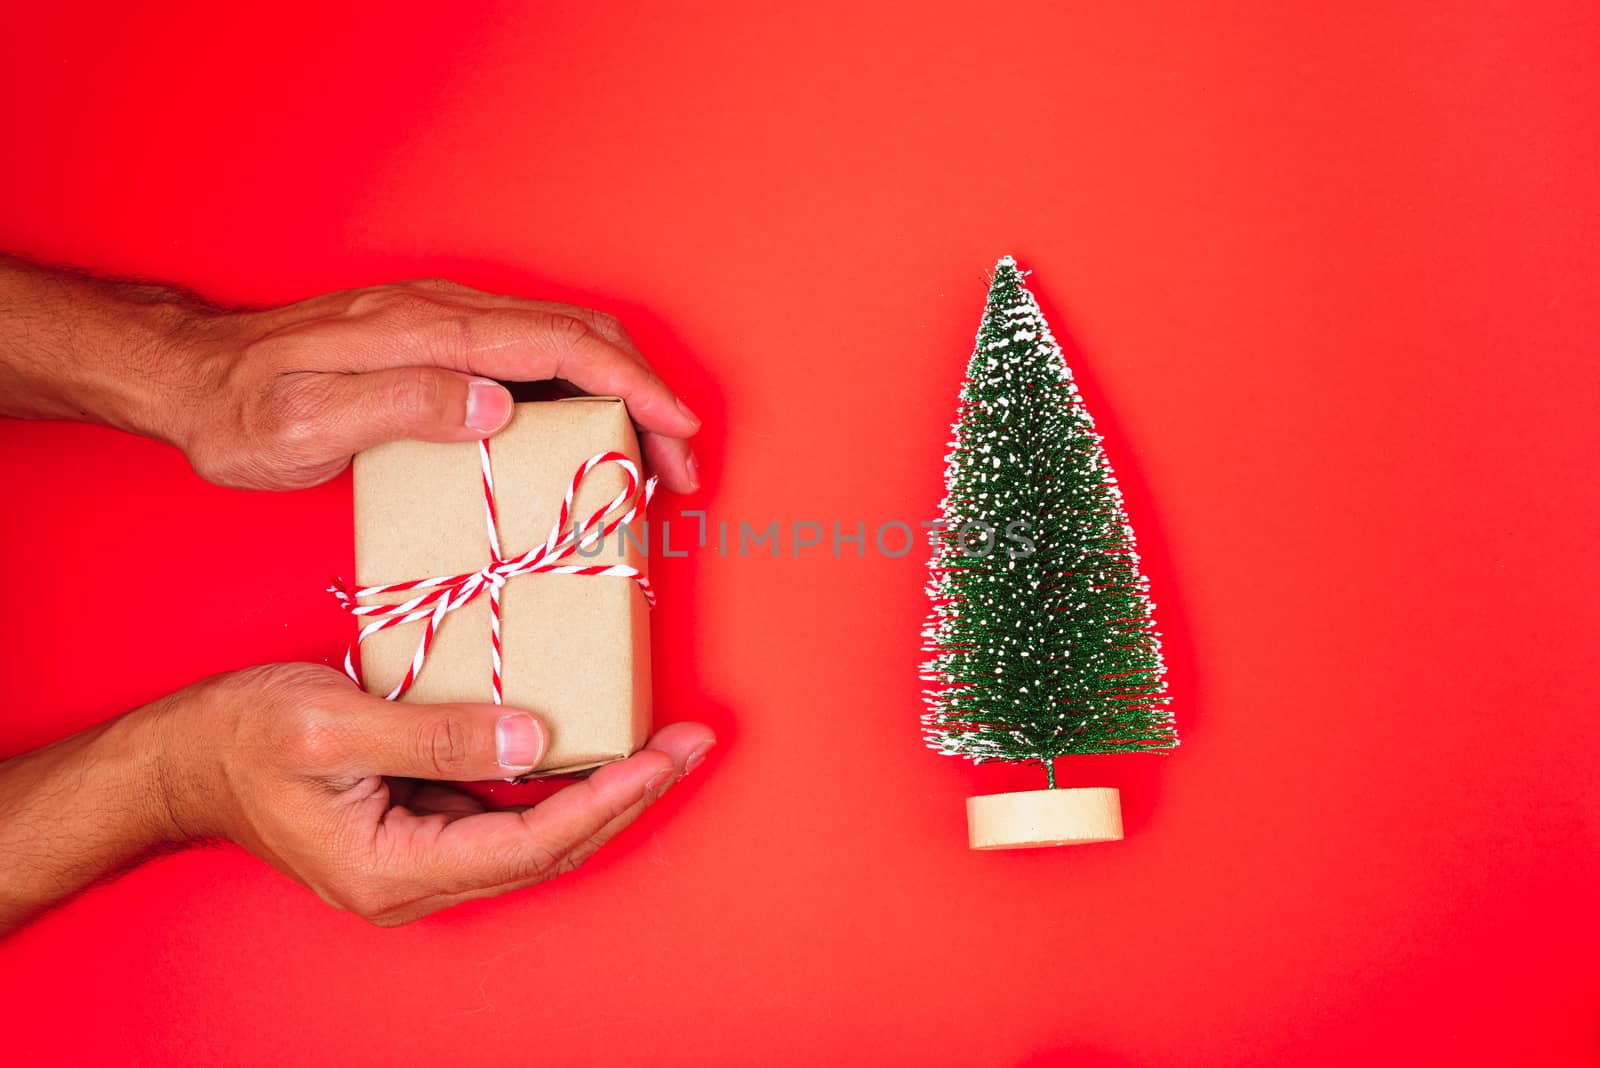 Happy New Year and Christmas 2020 or valentine day, top view hands with Brown gift box on red background with copy space for your text